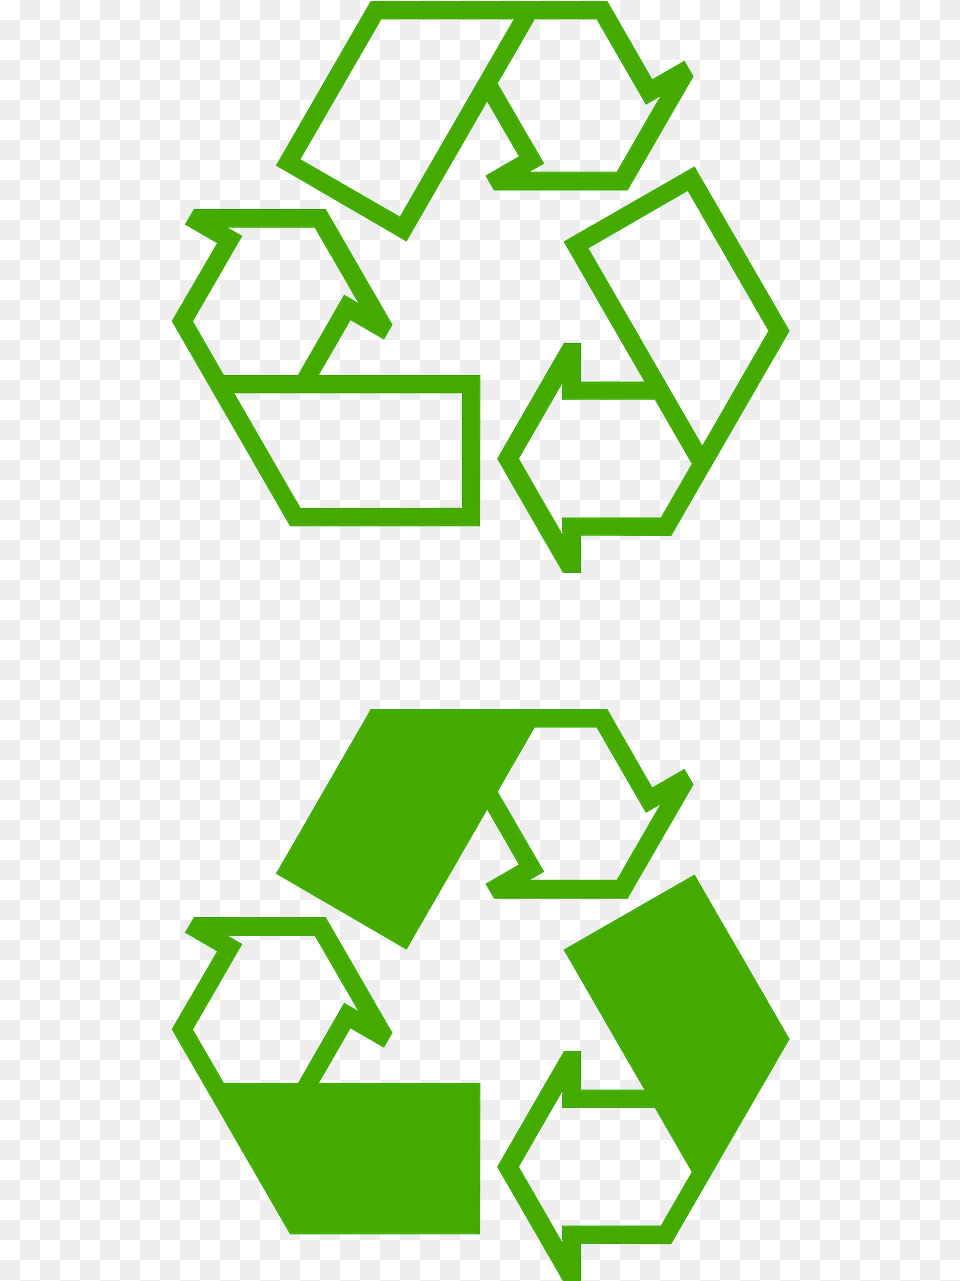 Recycling Logo Recycle Green Ecology Recycle Bin Coloring, Recycling Symbol, Symbol Png